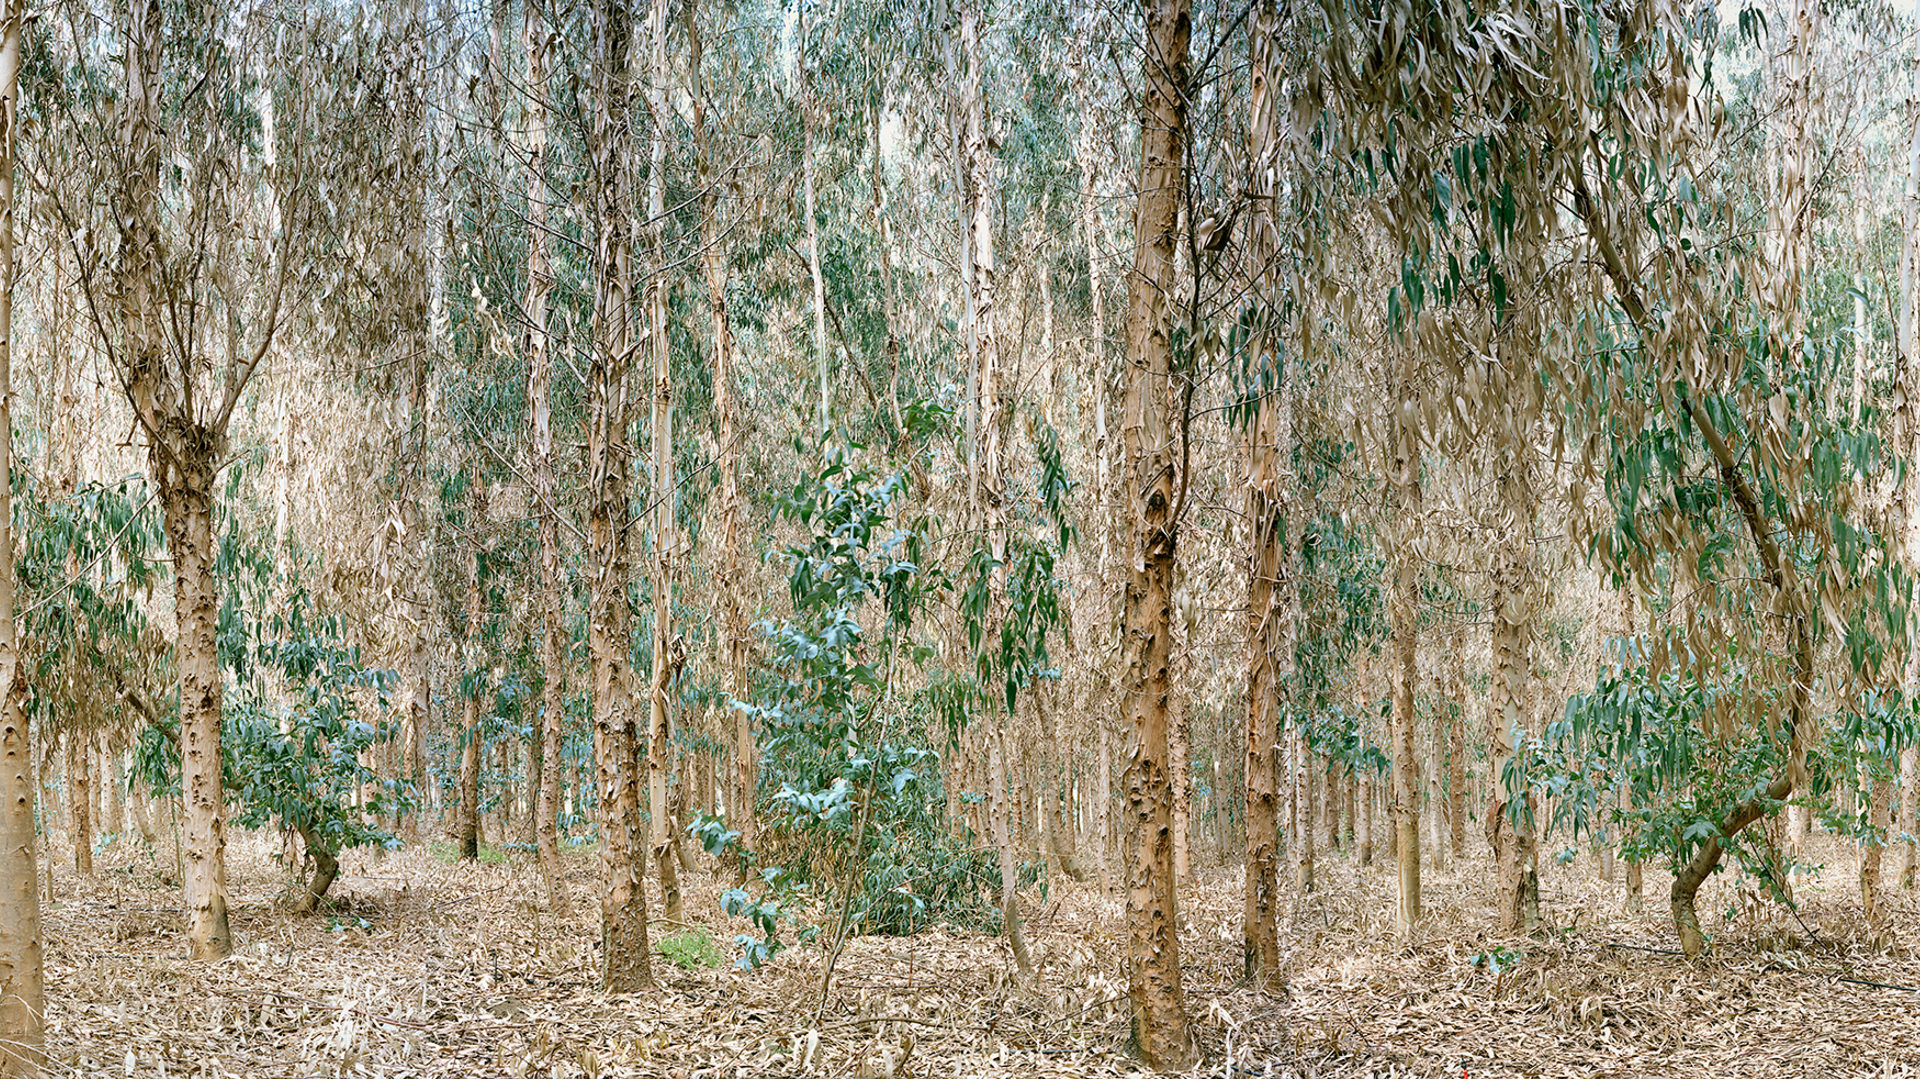 Forest of eucalyptus trees planted to absorb contaminated water from Los Pelambres mine. Los Vilos commune, Chile, 2012